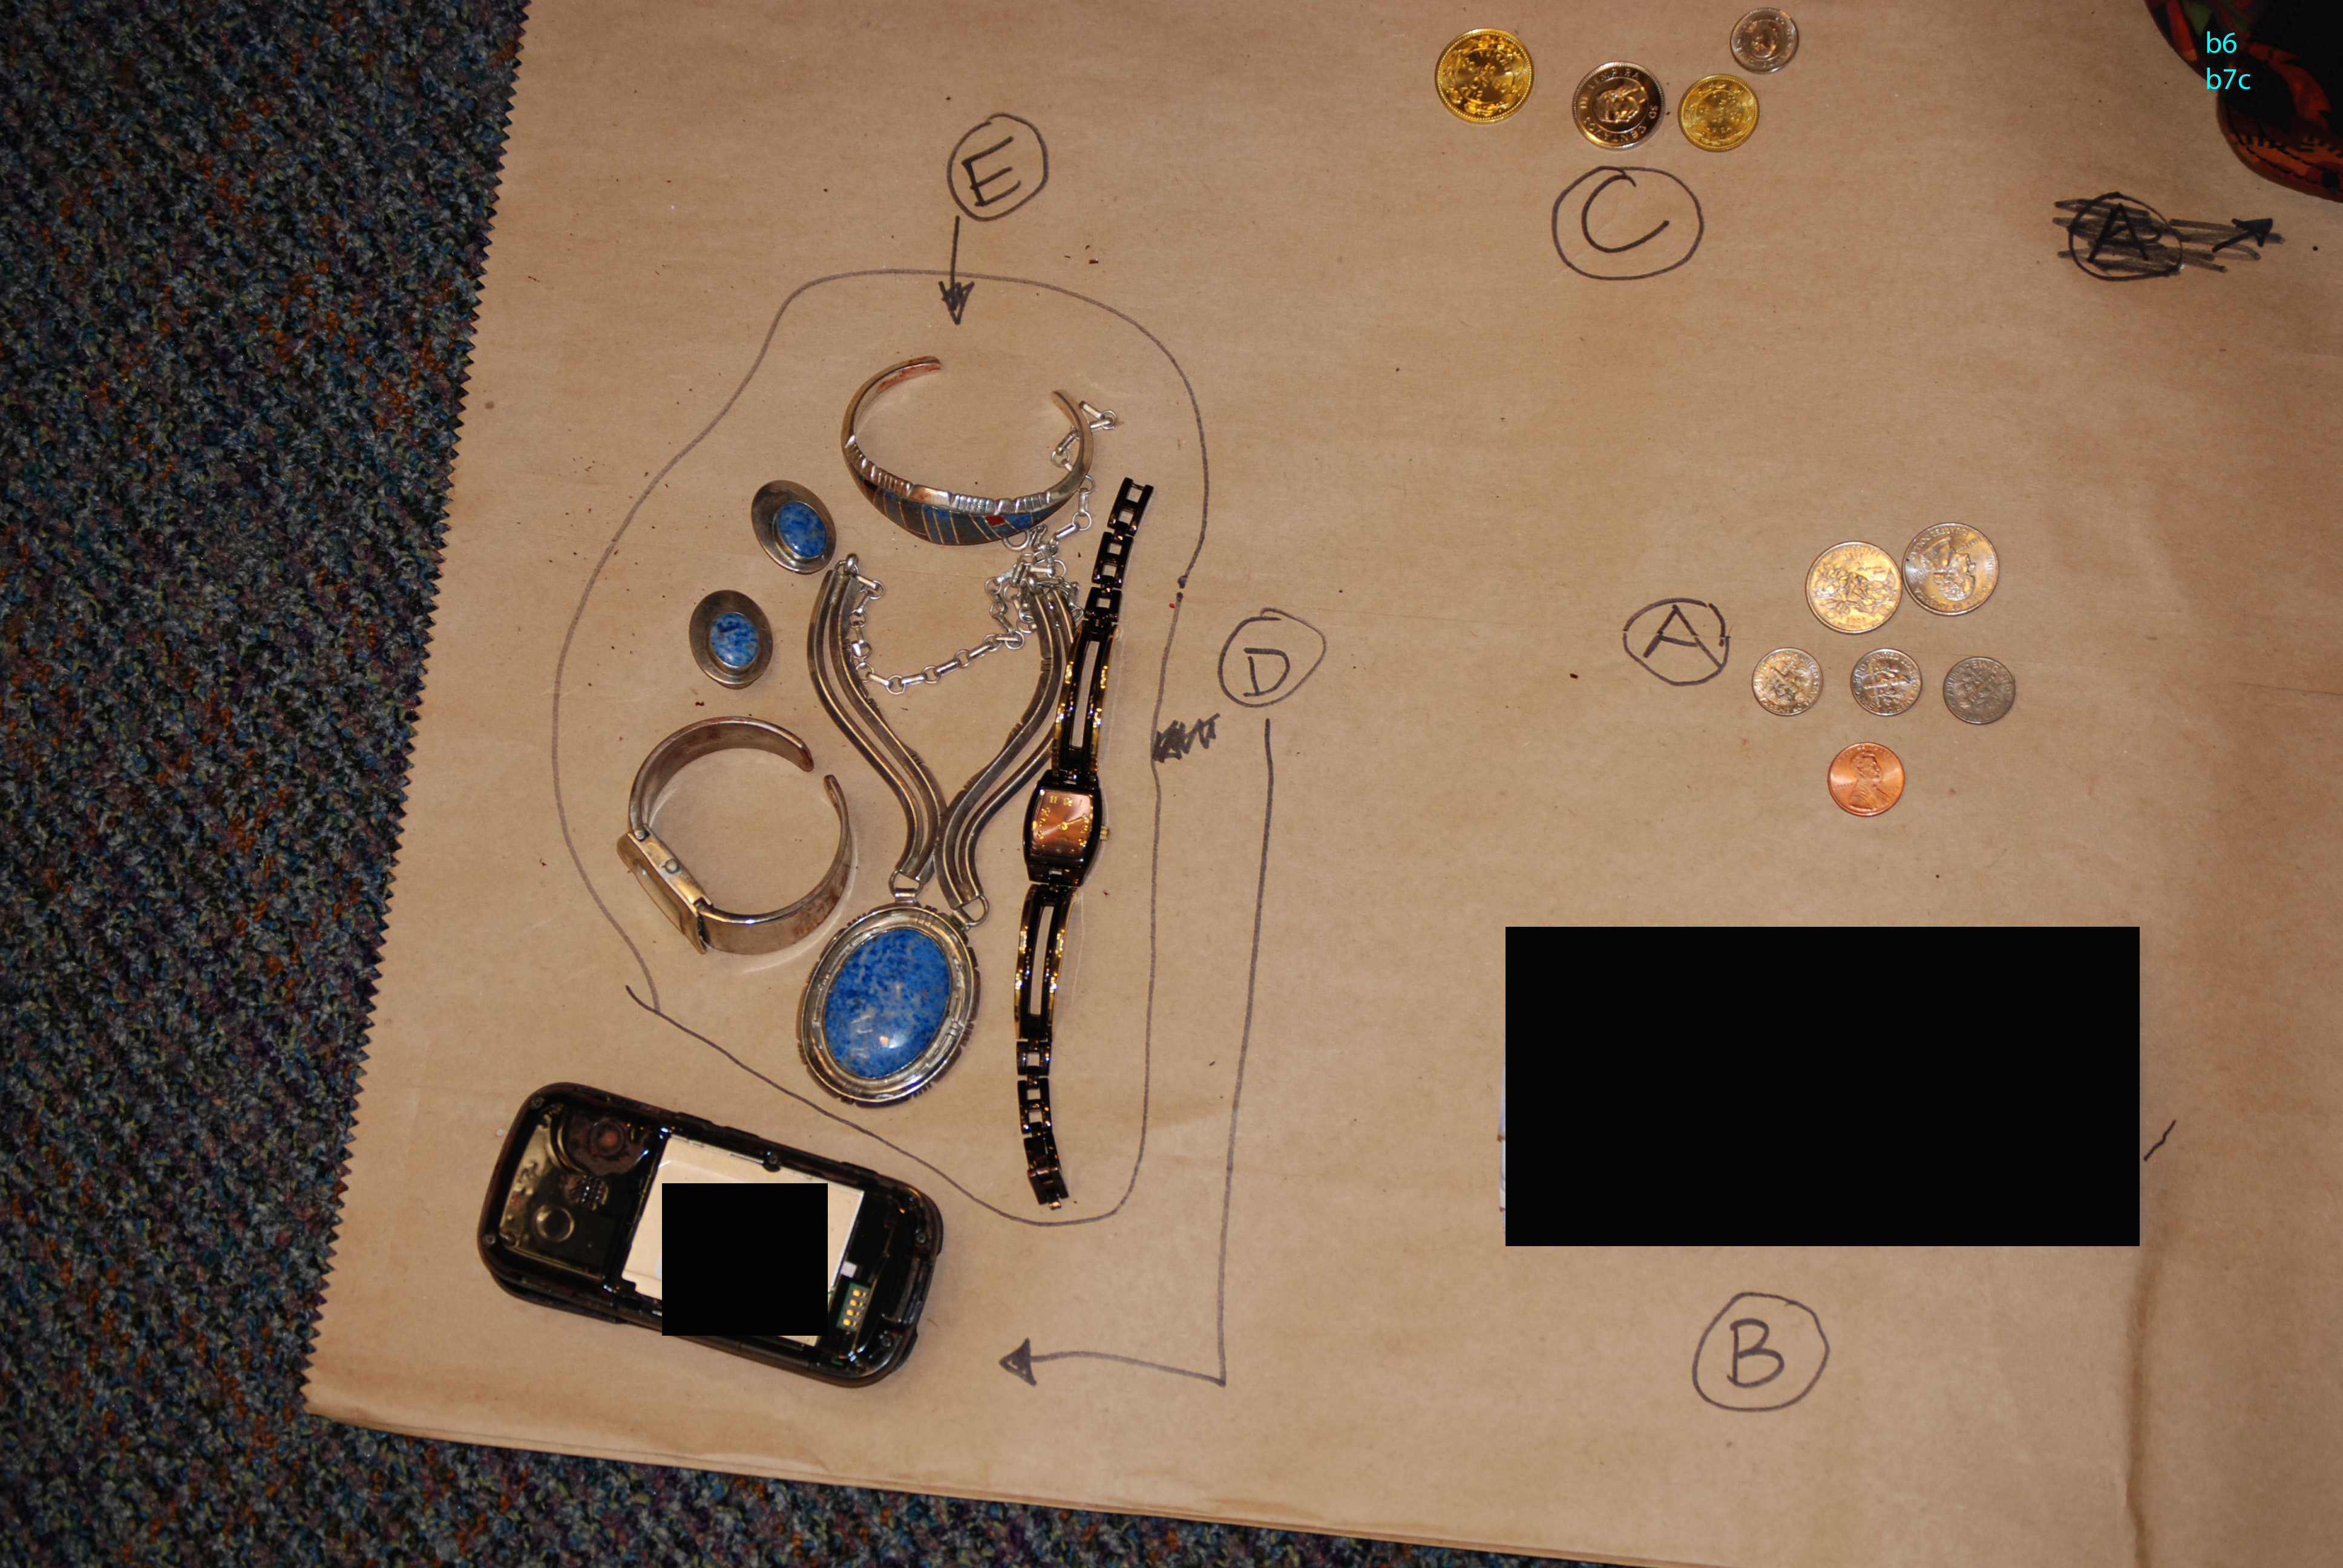 2011 Tucson Shooting Belongings Recovered - Photograph 2